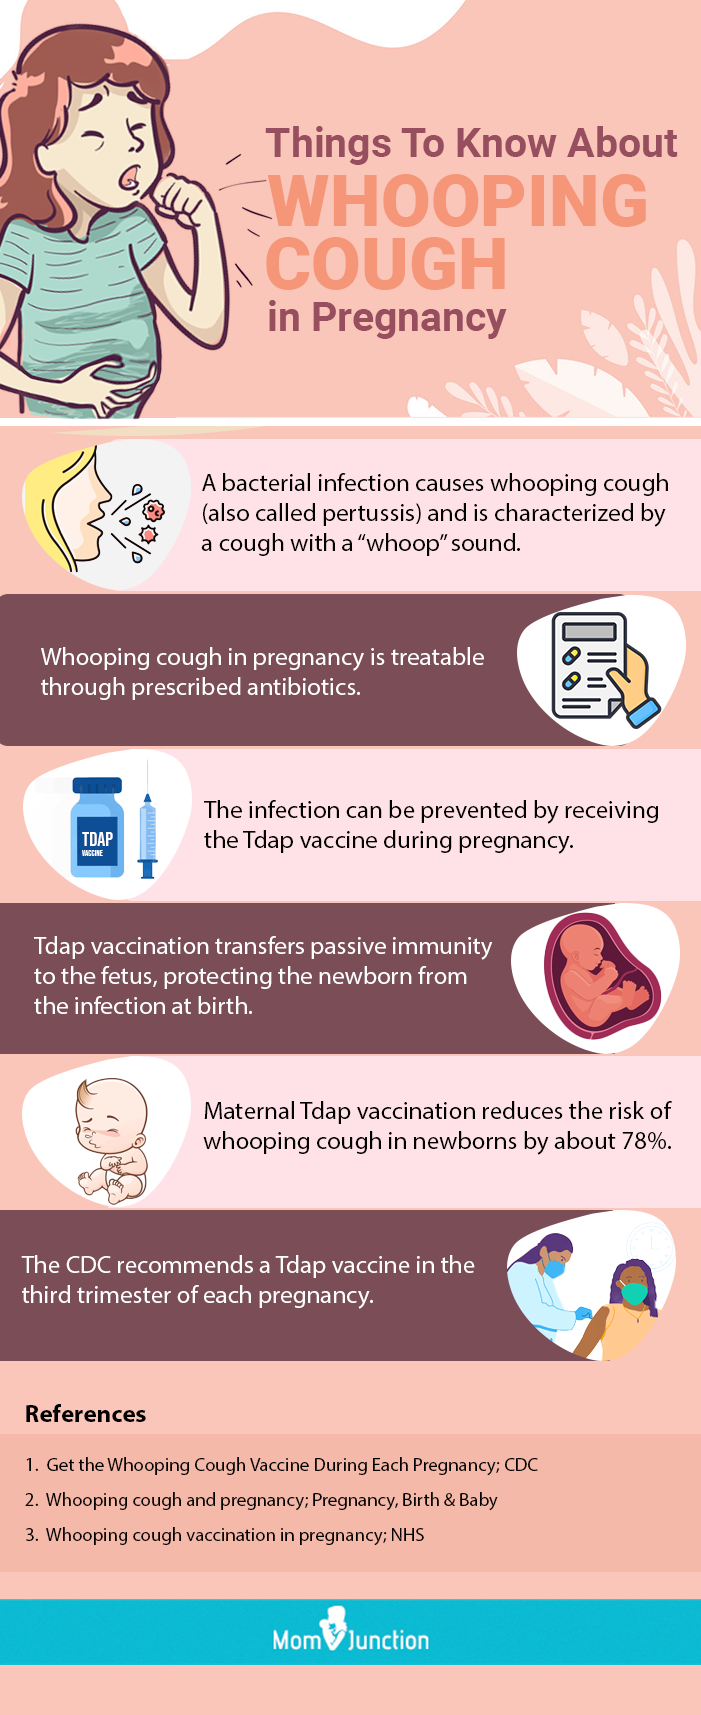 things to know about whooping cough in pregnancy [infographic]